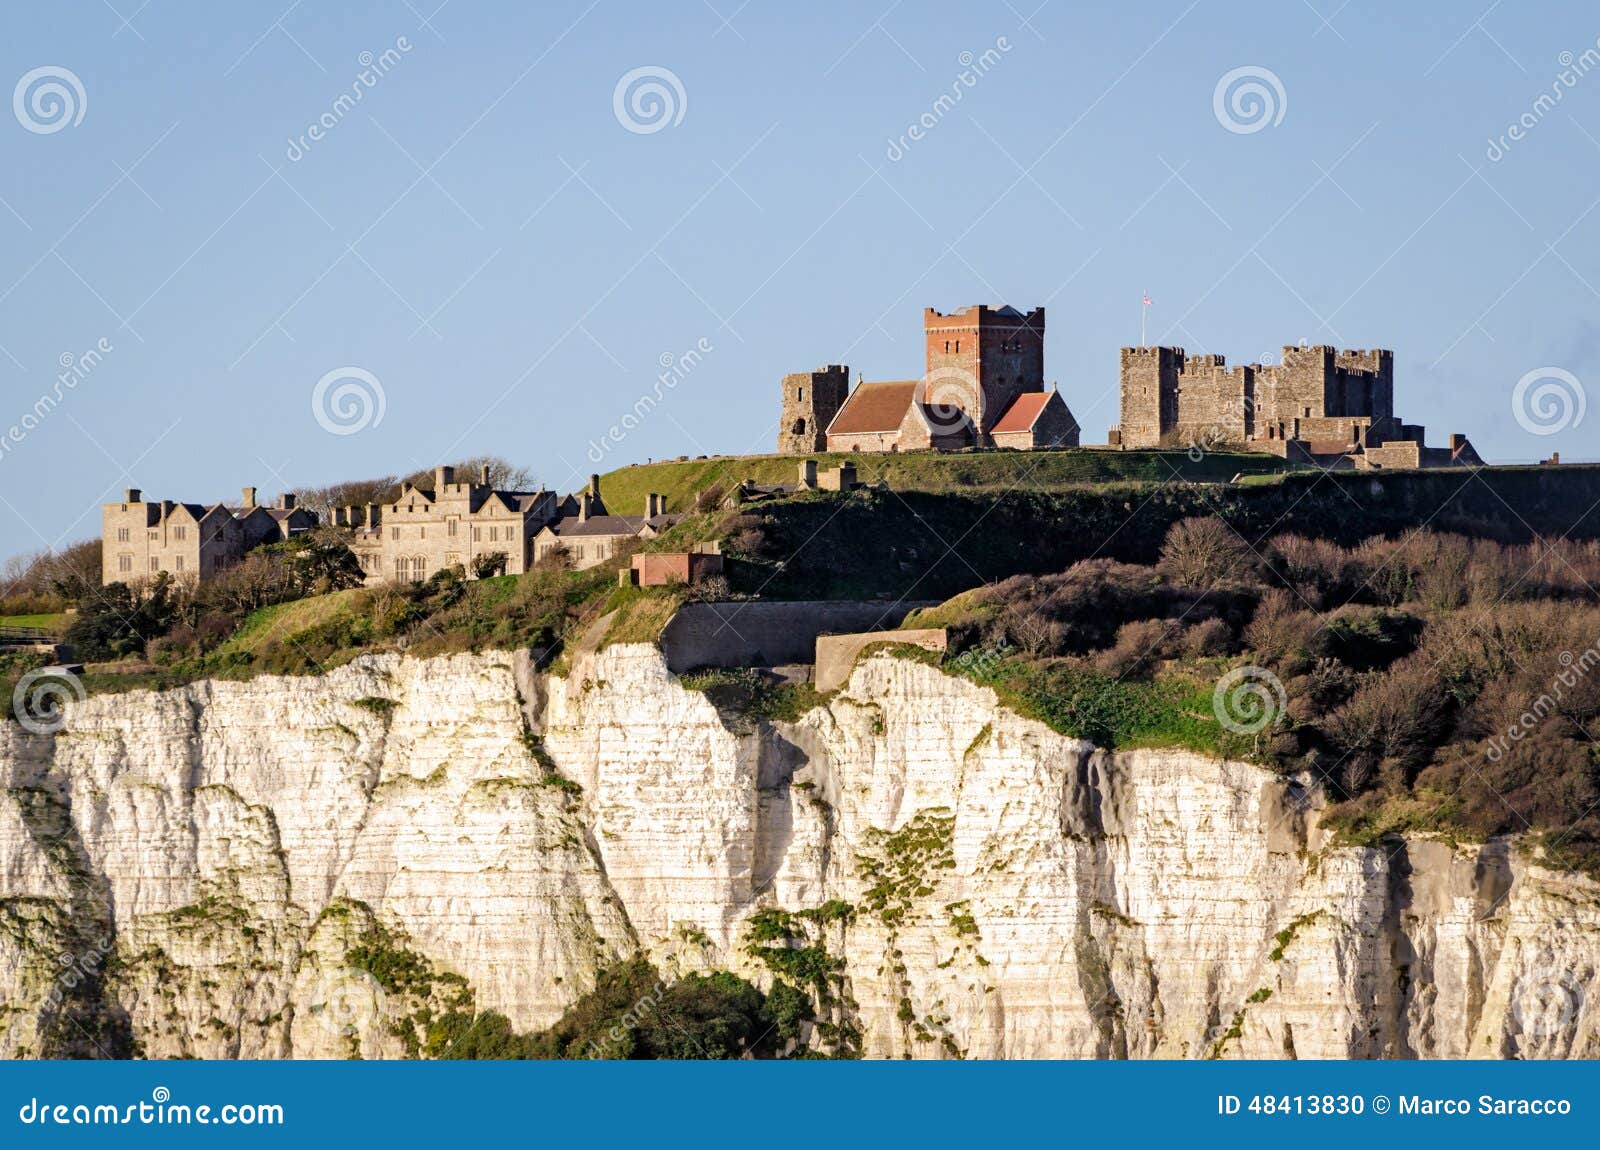 dover, england, white cliffs and castle